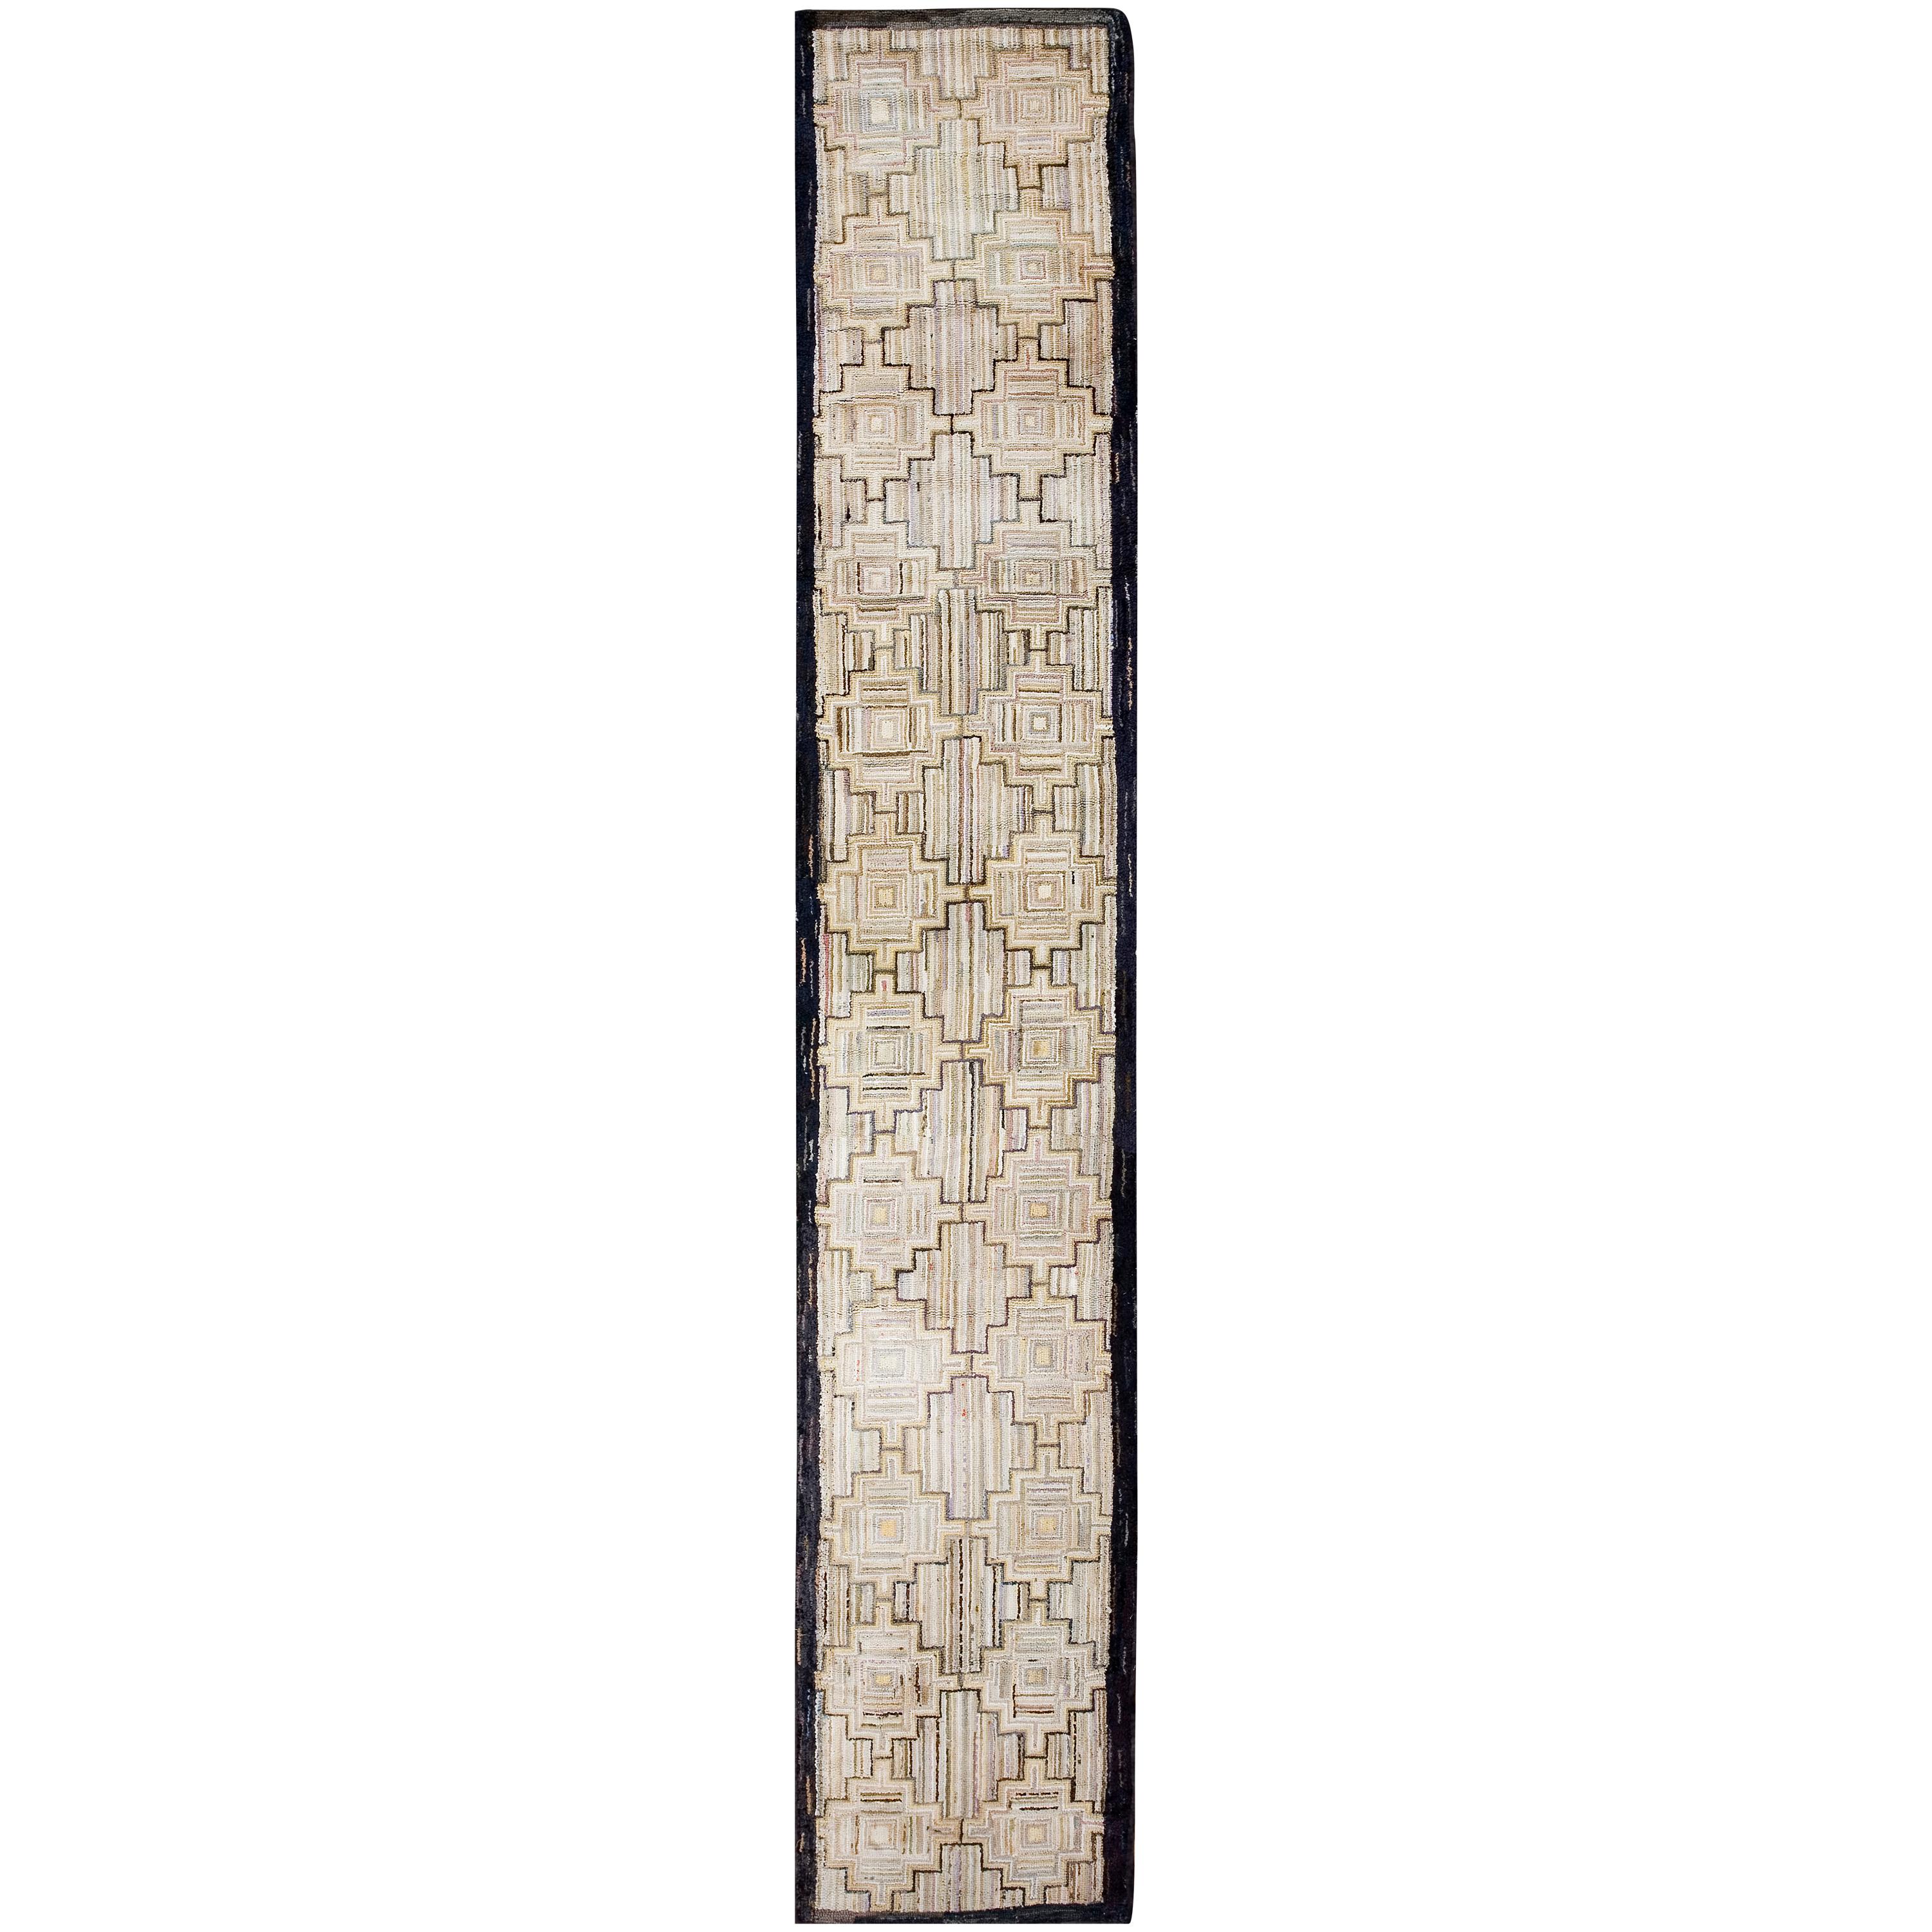 Antique American Hooked Rug 2' 2" x 12' 0". For Sale